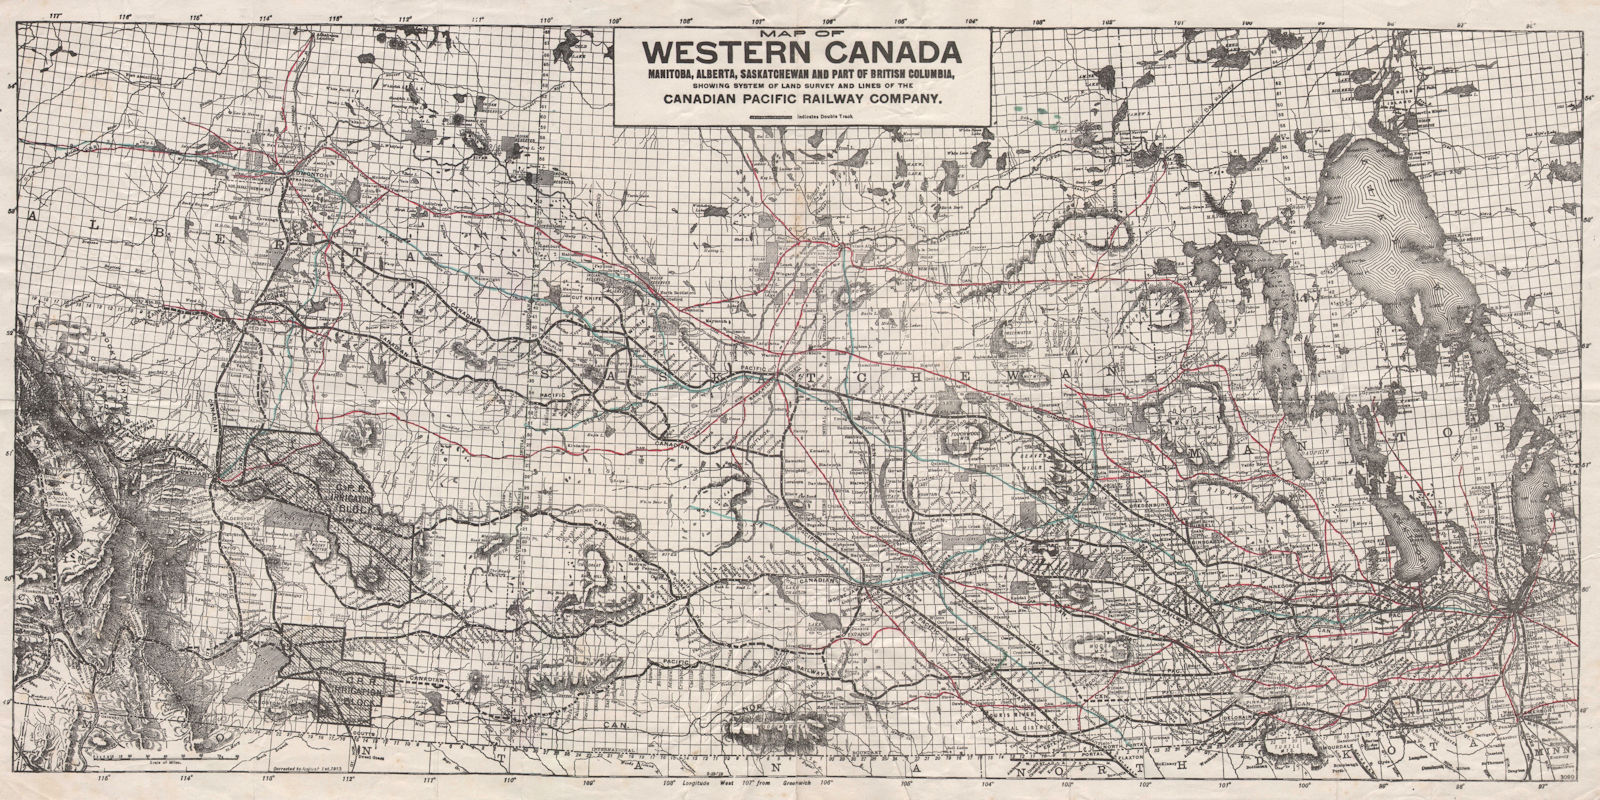 Associate Product WESTERN CANADA showing Canadian Pacific Railway lines 1913 old antique map